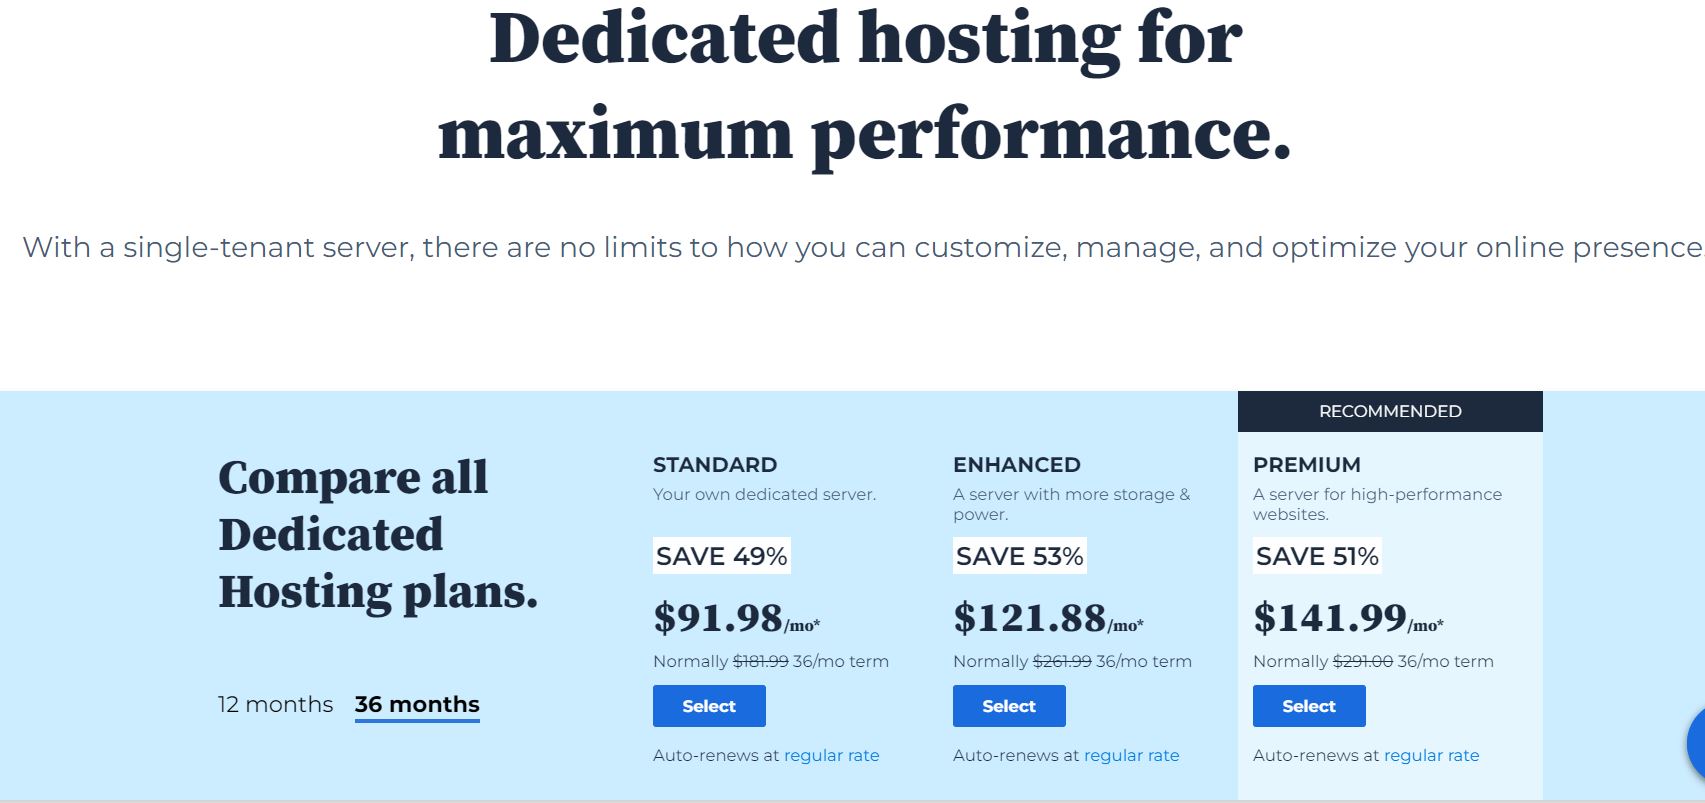 How Much Does Bluehost Cost Per Year